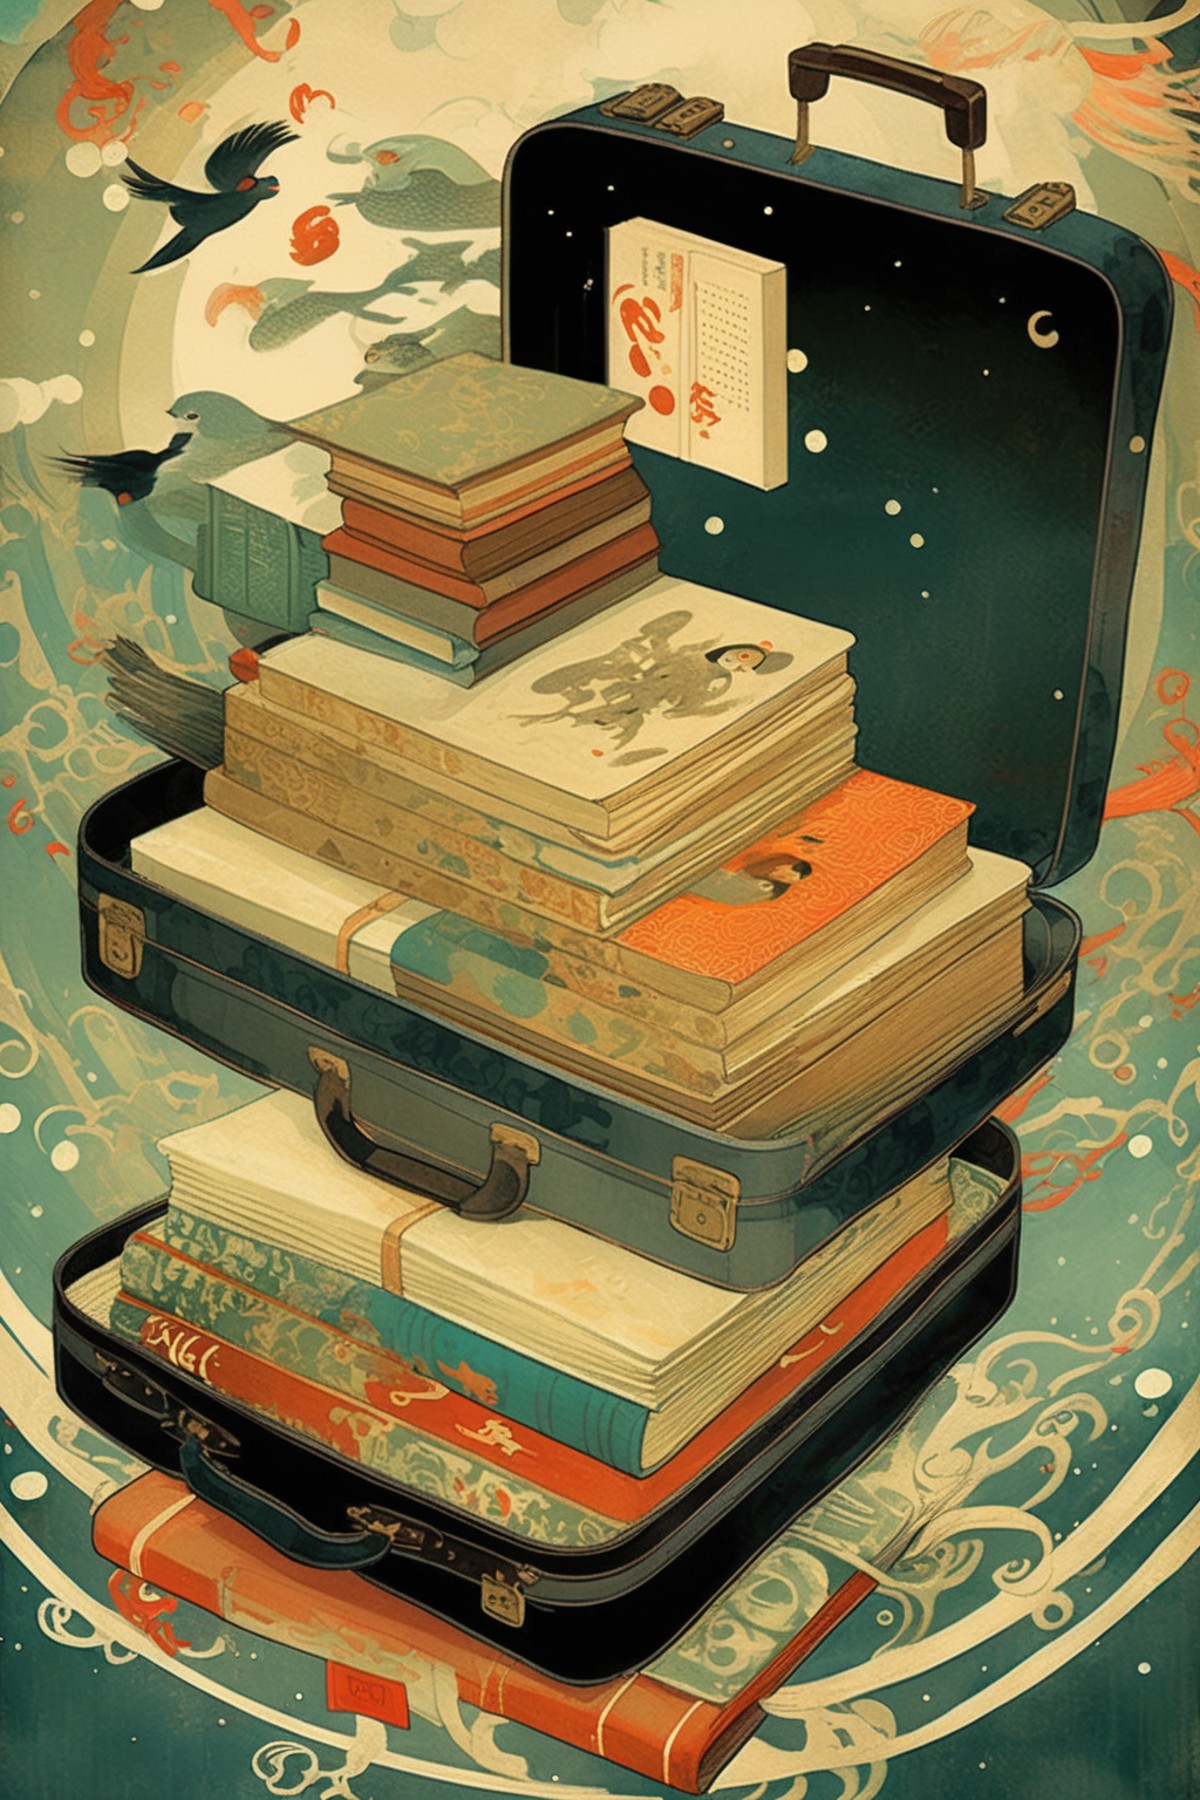 <lora:Victo Ngai Style:1>Victo Ngai Style - by Victto Ngai, an old suitcase and old books